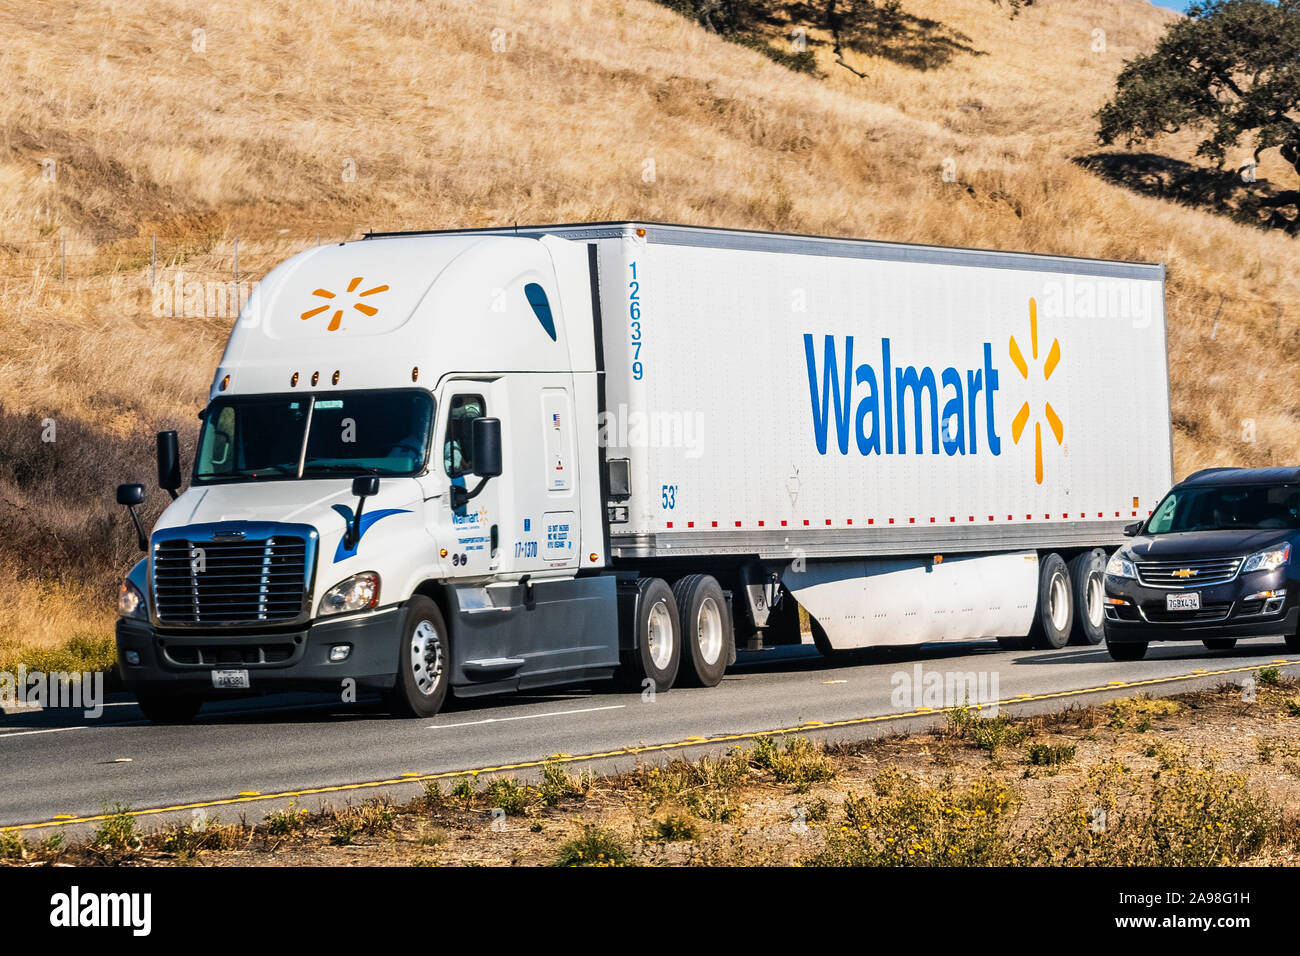 Nov 10, 2019 Hollister / CA / USA - Walmart truck driving on the freeway among hills covered in dry grass Stock Photo